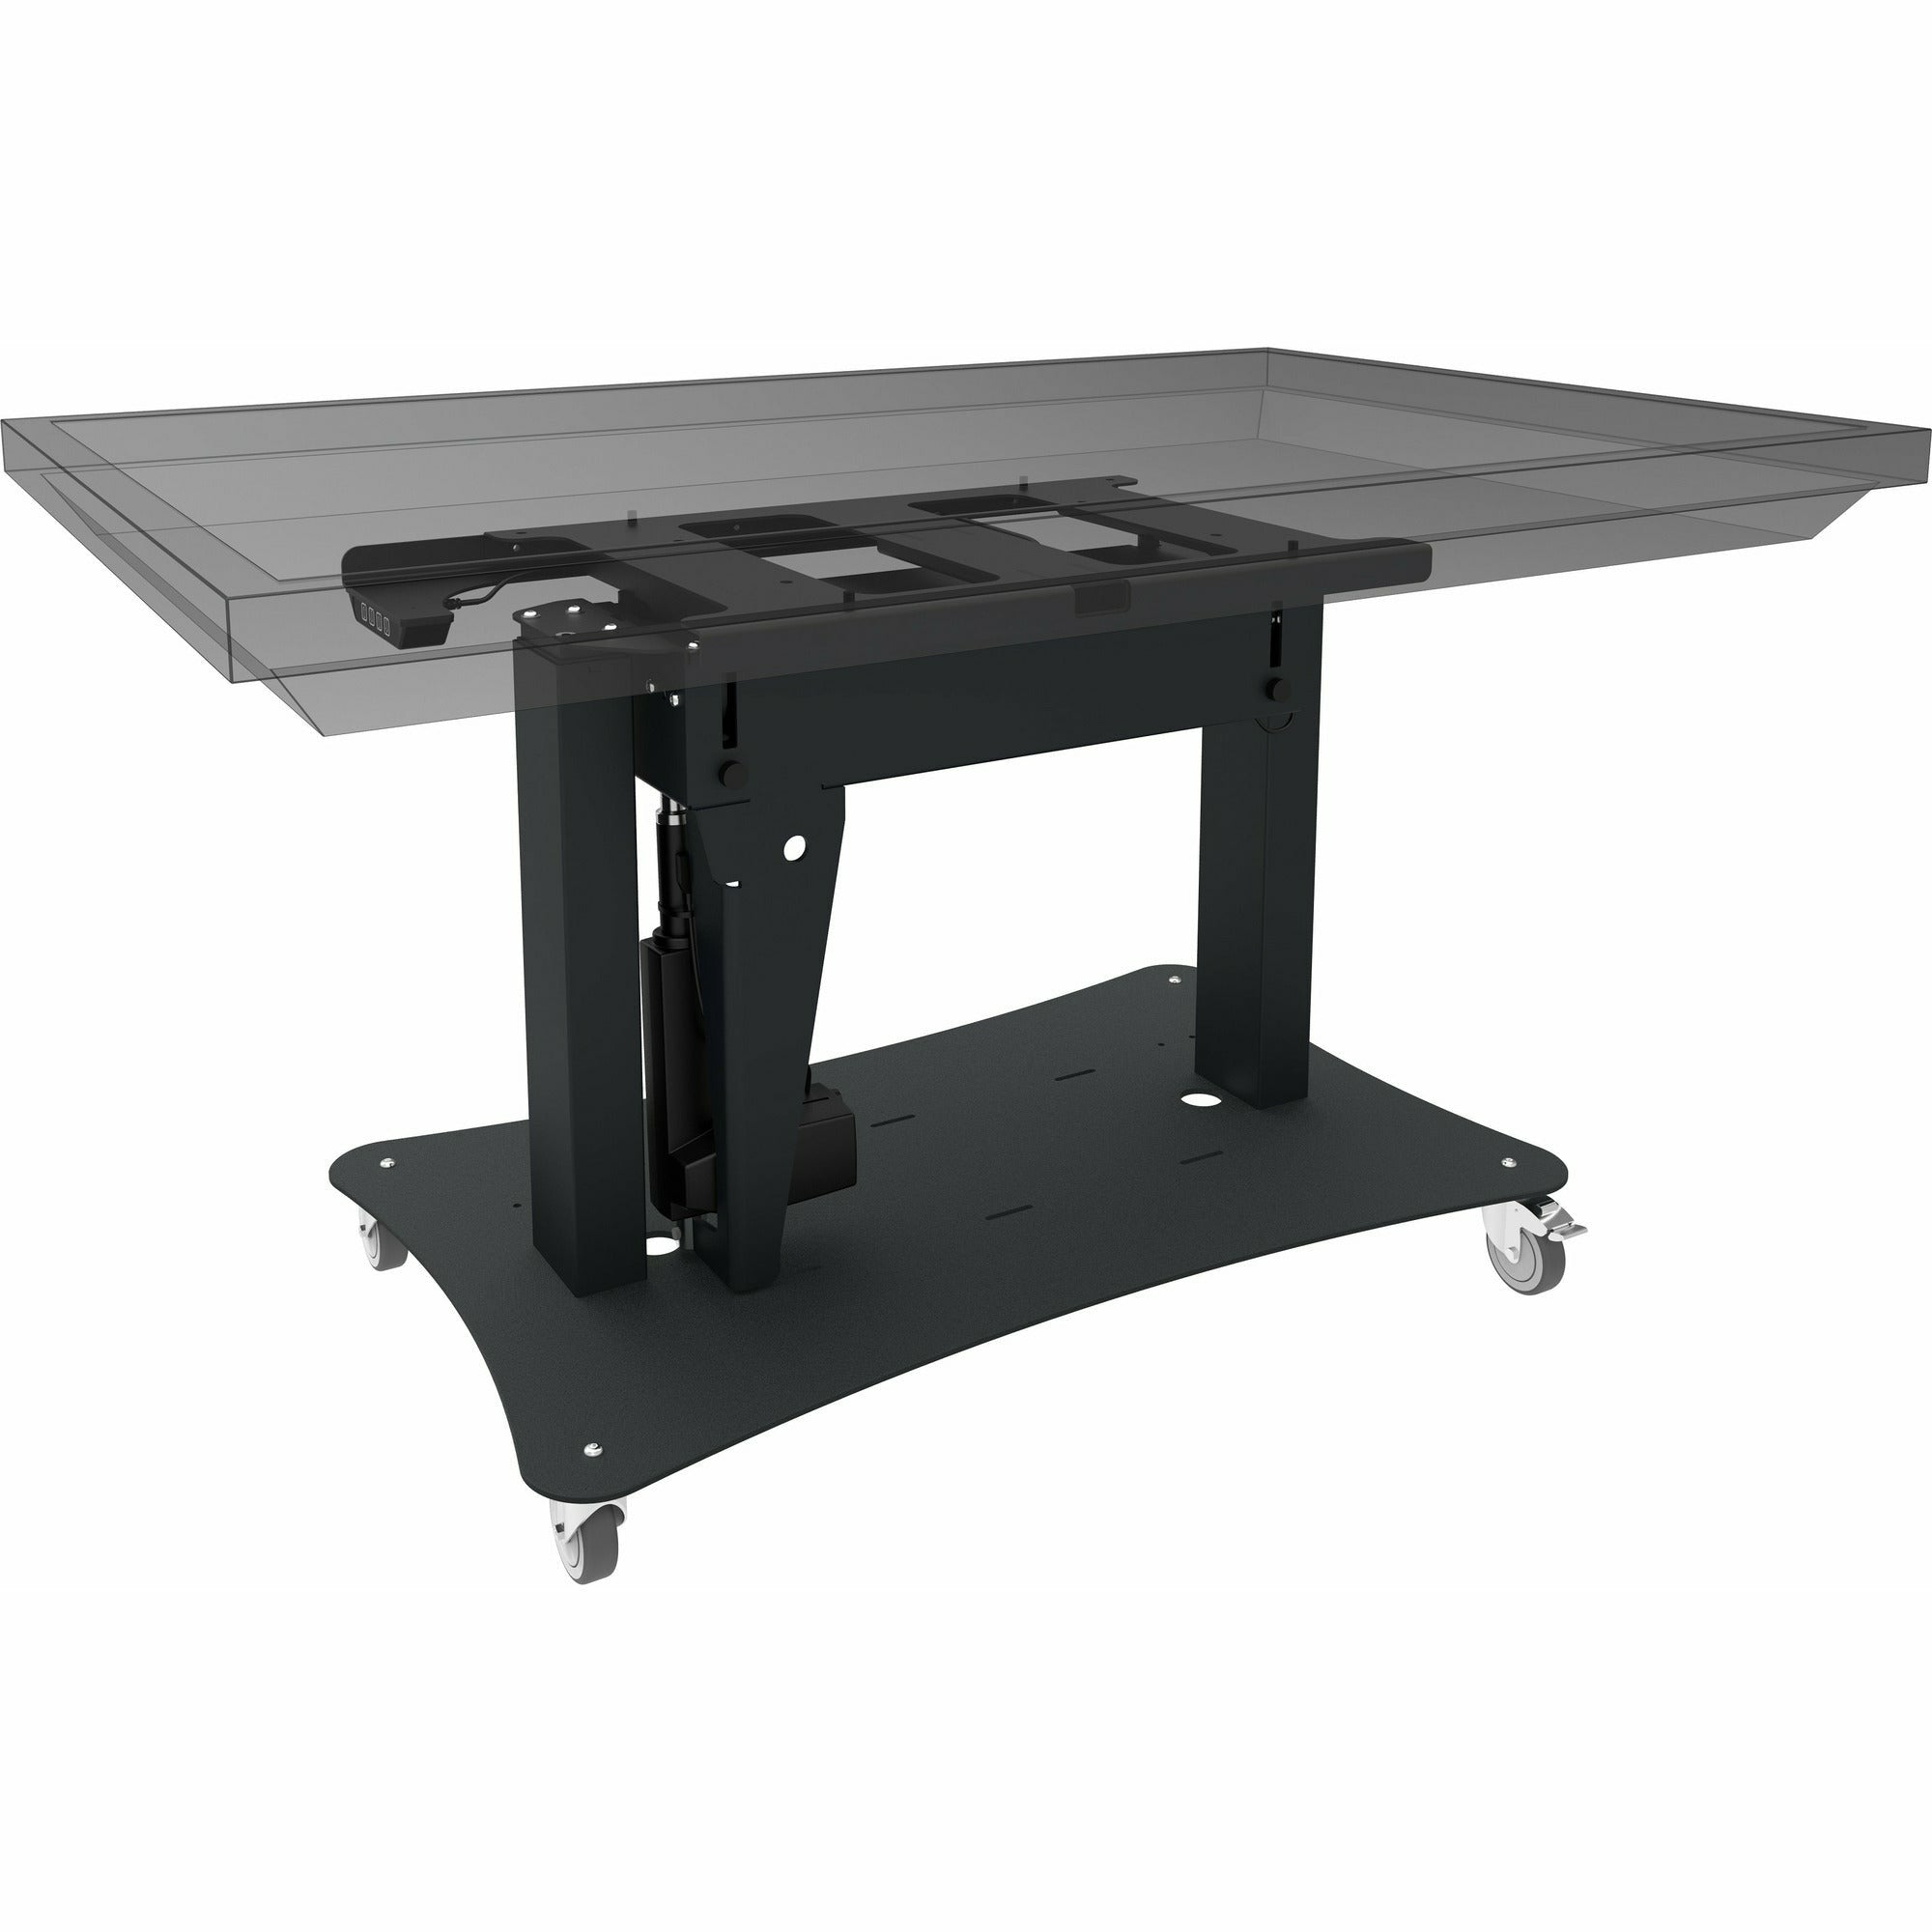 iiyama Tip & Touch stand (motorized tip function) Height adjustment = 660-1320 mm